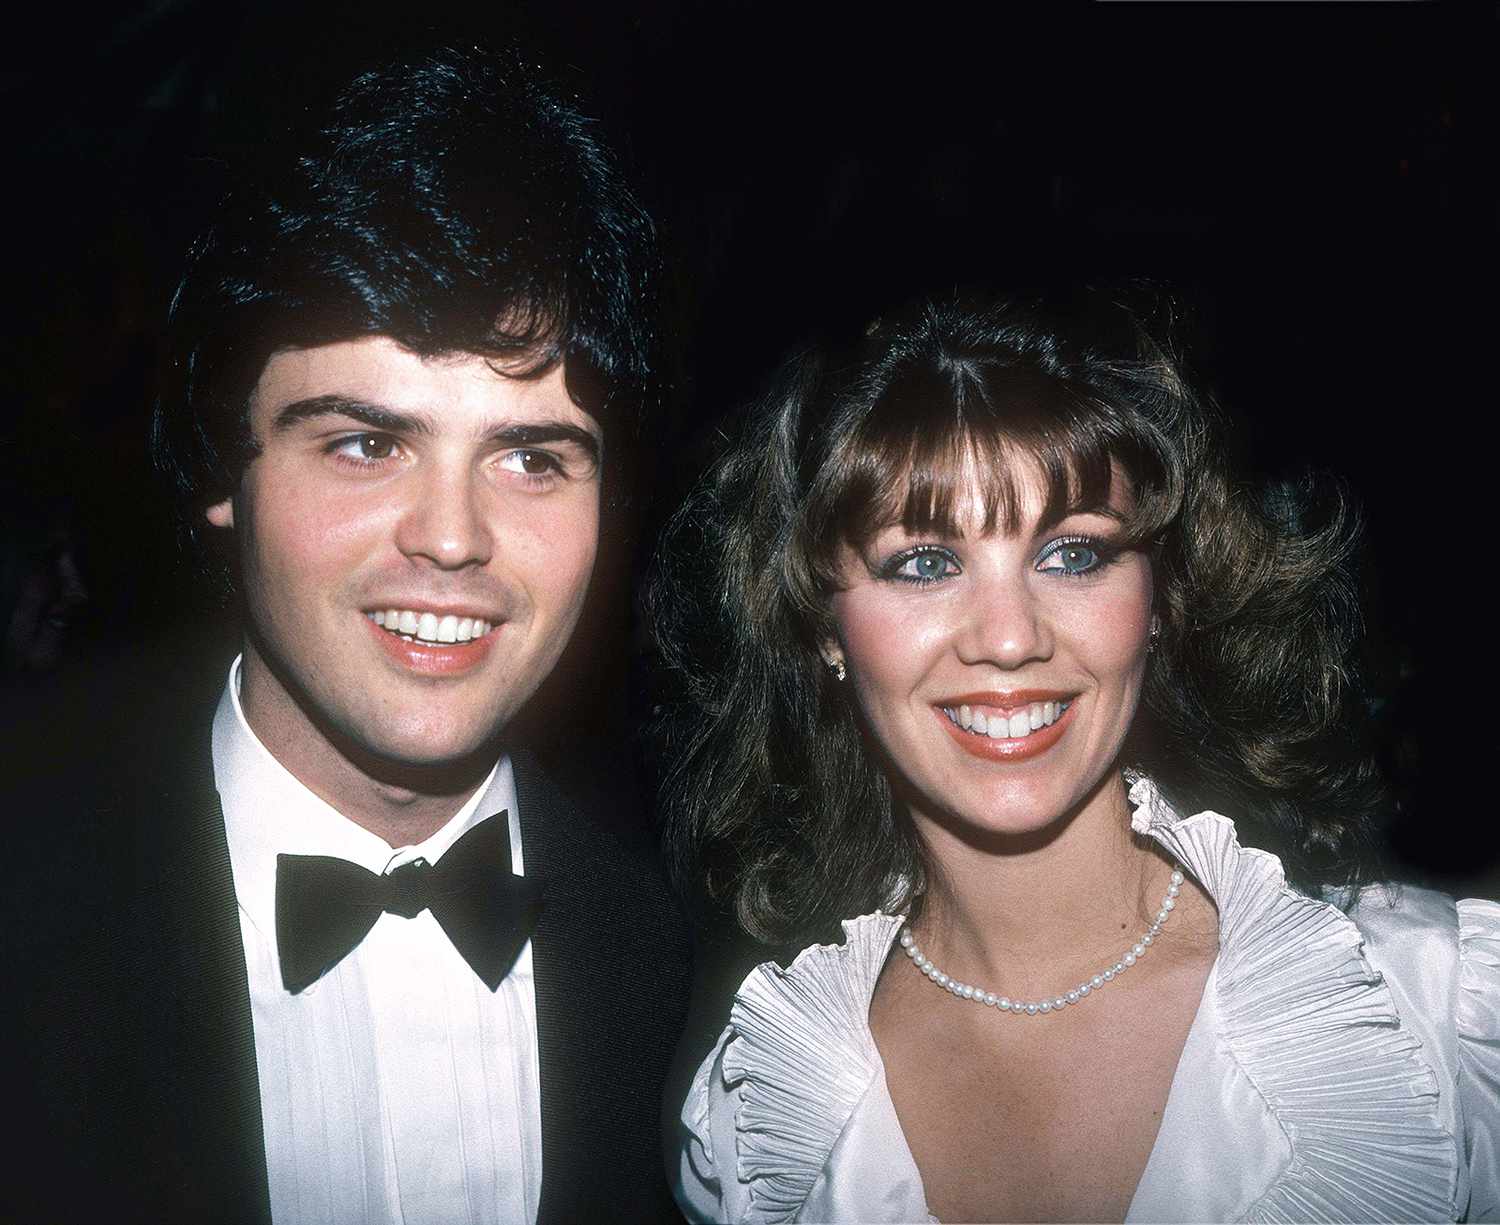 Young Donny Osmond and wife, Debbie Osmond (Credits: Closer Weekly)